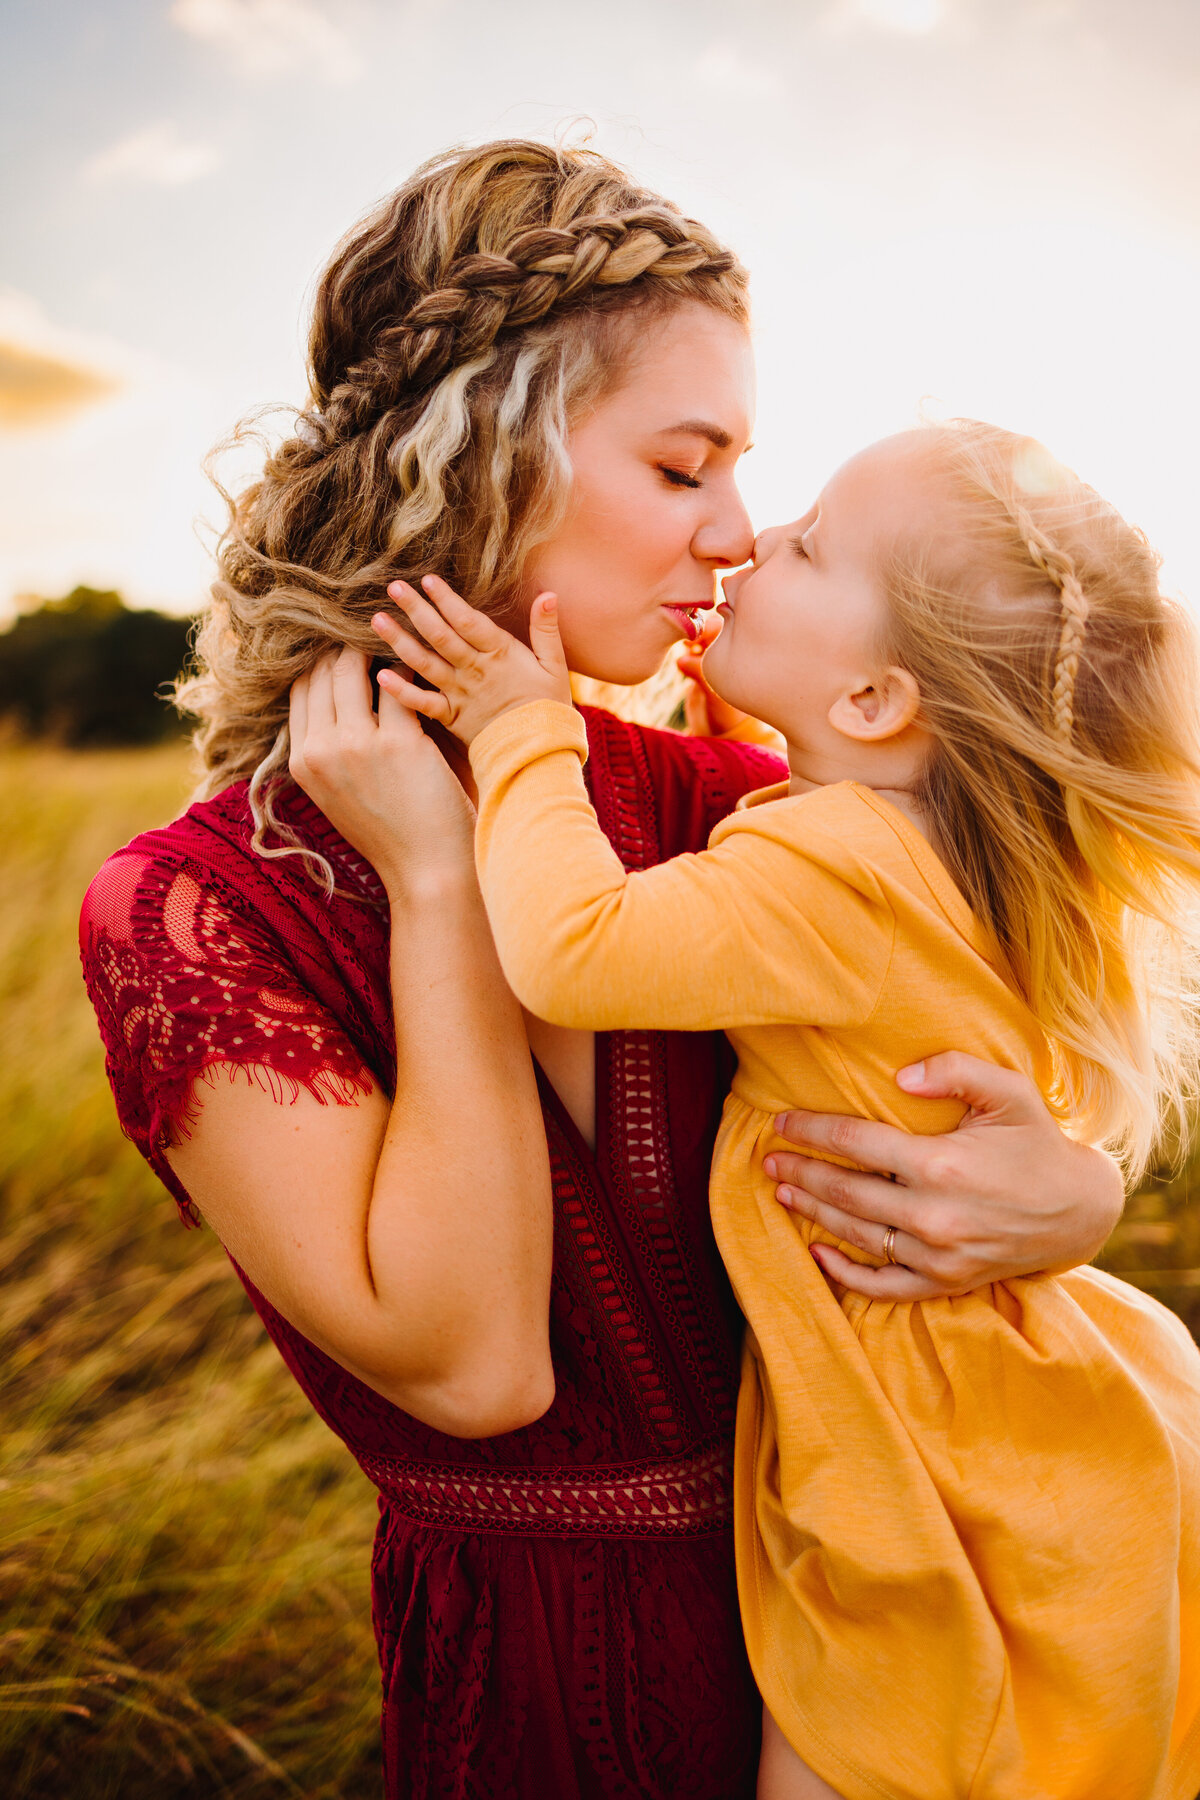 Photo of a woman with her baby girl in a garden. She has a braid in her blonde hair and with her eyes closed is giving a peck to the little girl, the woman has a red dress. The girl has a yellow dress and has a hand on the woman's cheek